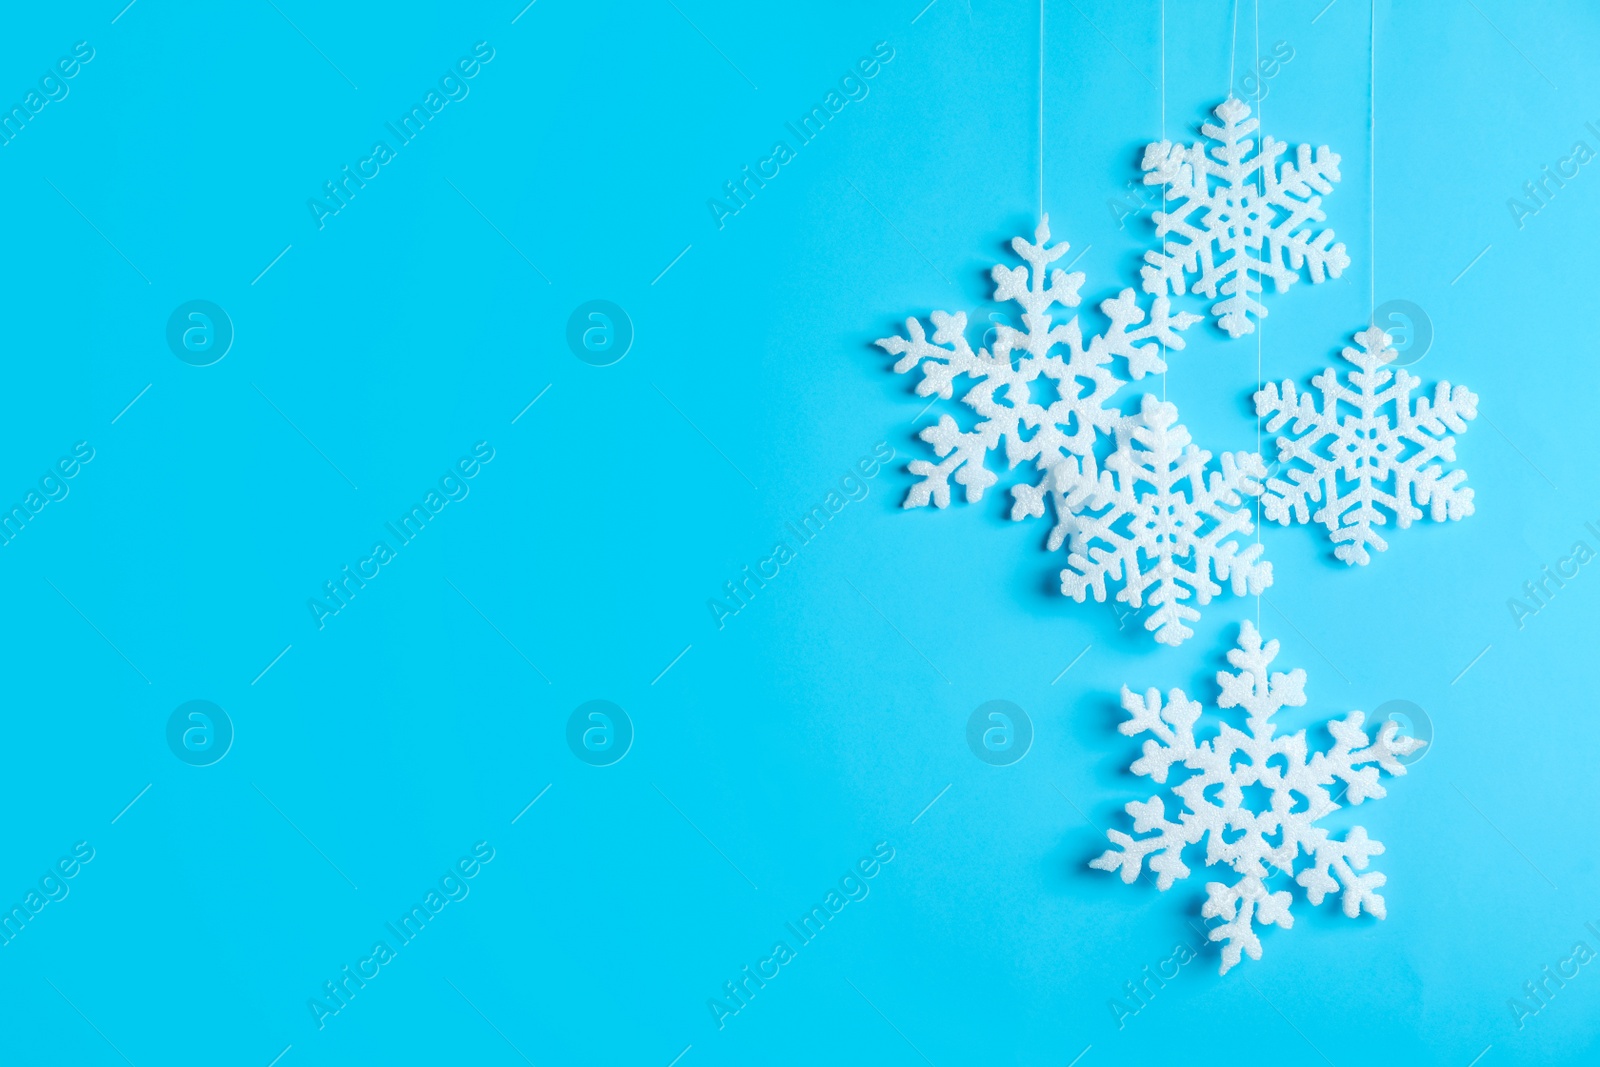 Photo of Beautiful decorative snowflakes hanging on light blue background, space for text